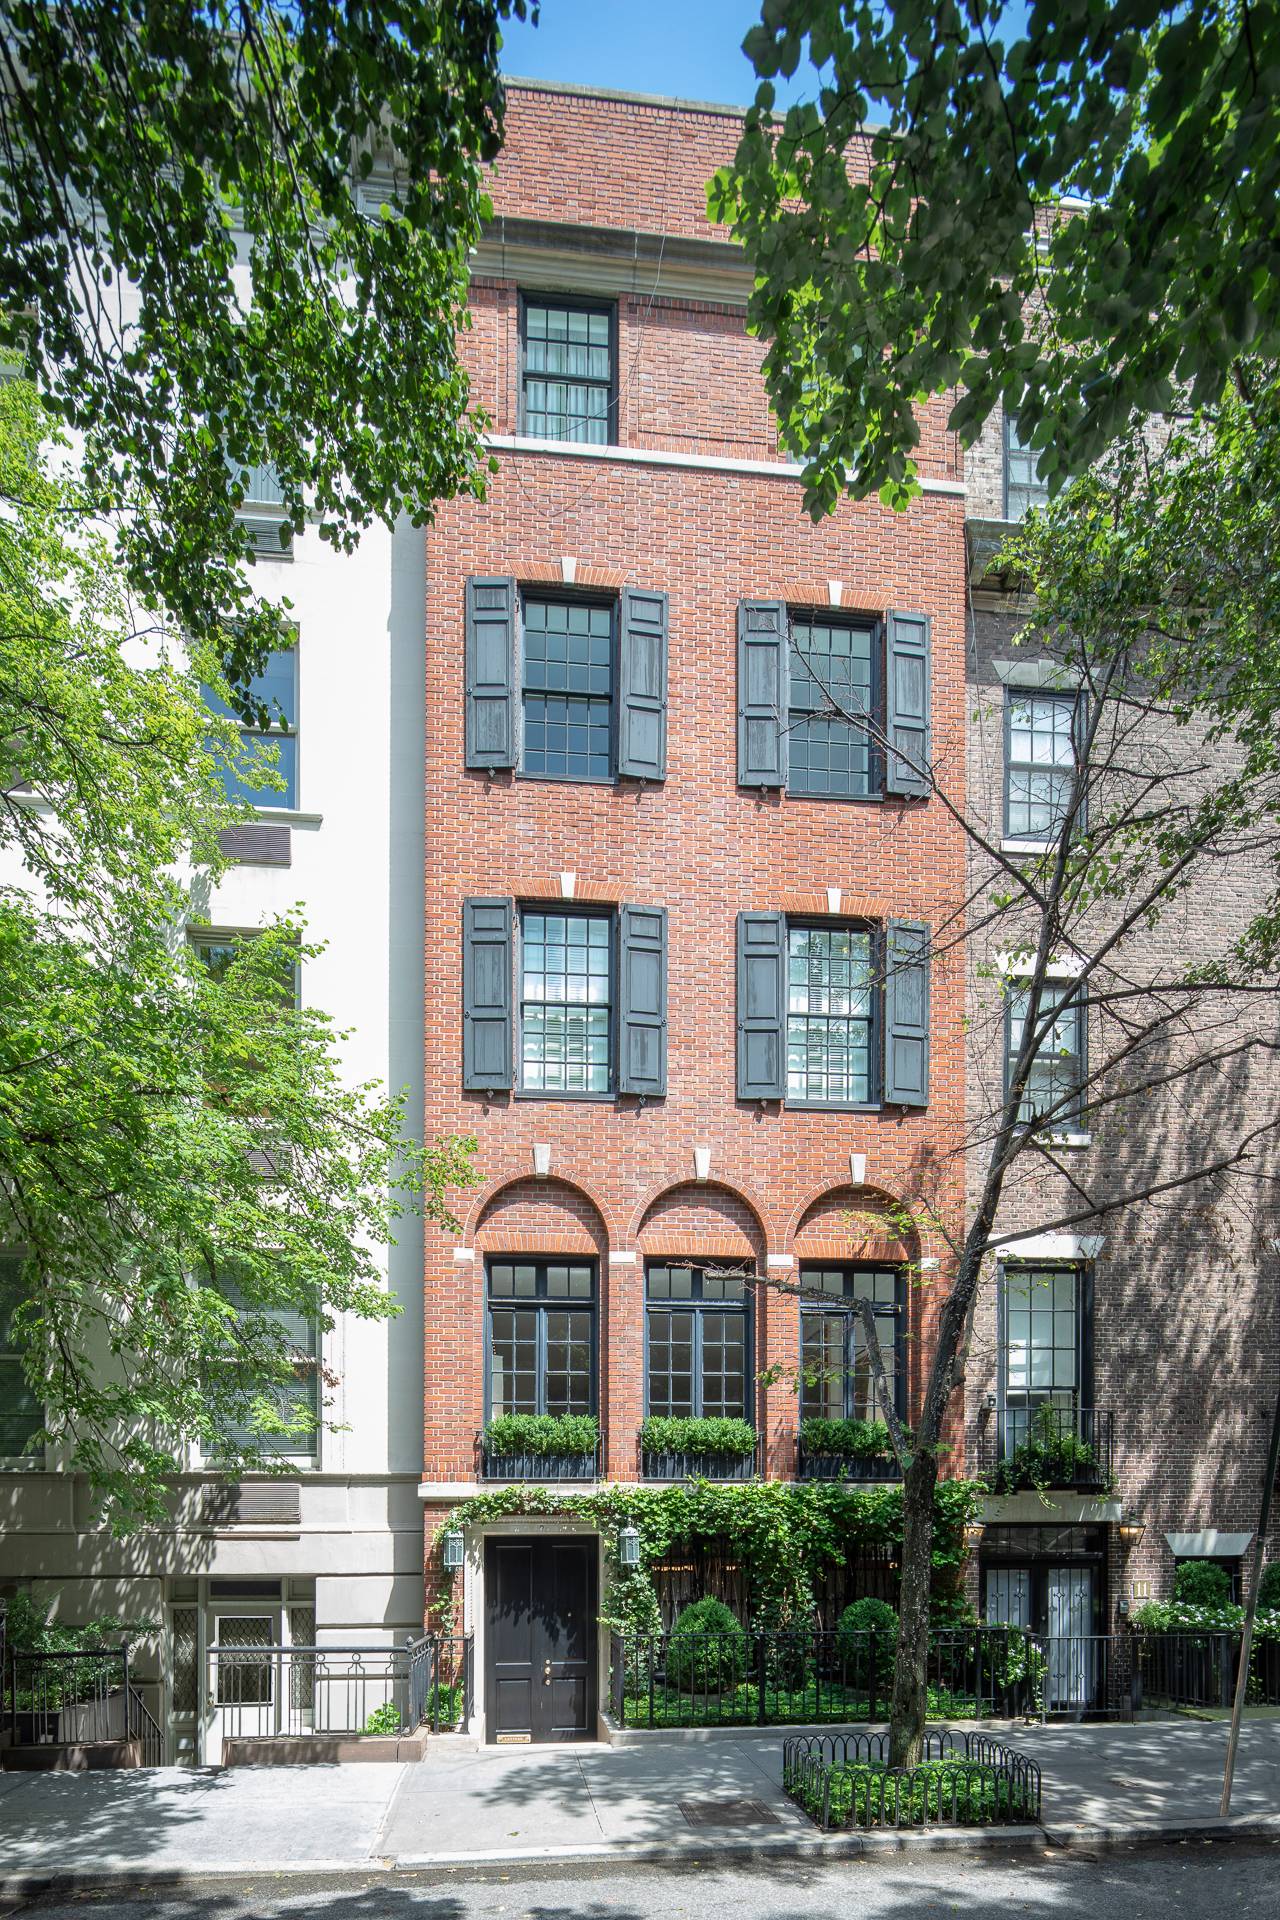 This handsome neo Federal brick and limestone trimmed townhouse was built in 1878 by the brother sister team of Richard Arnold and Henrietta Constable, the fifth largest landowners in Manhattan.